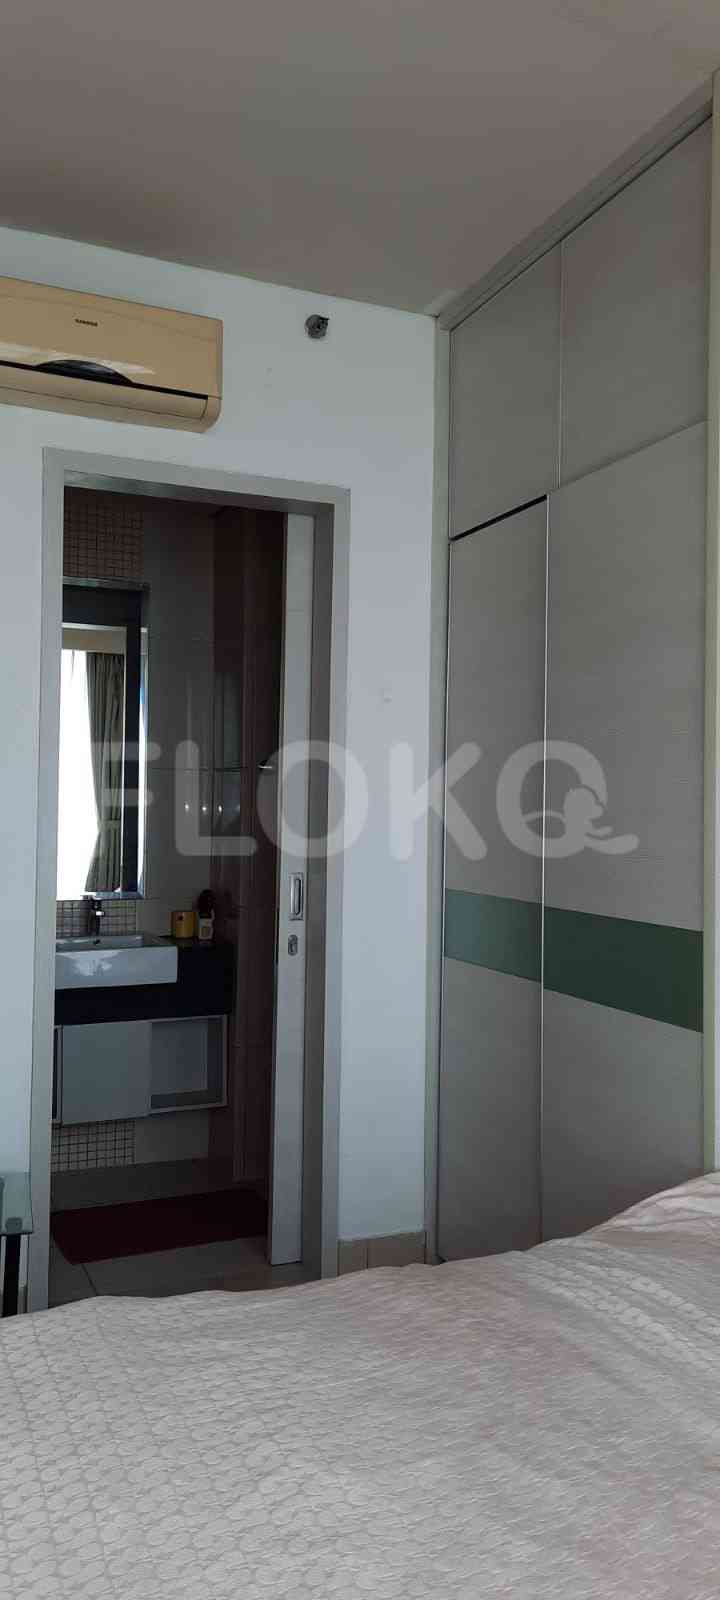 1 Bedroom on 15th Floor for Rent in Kuningan Place Apartment - fkud9c 1